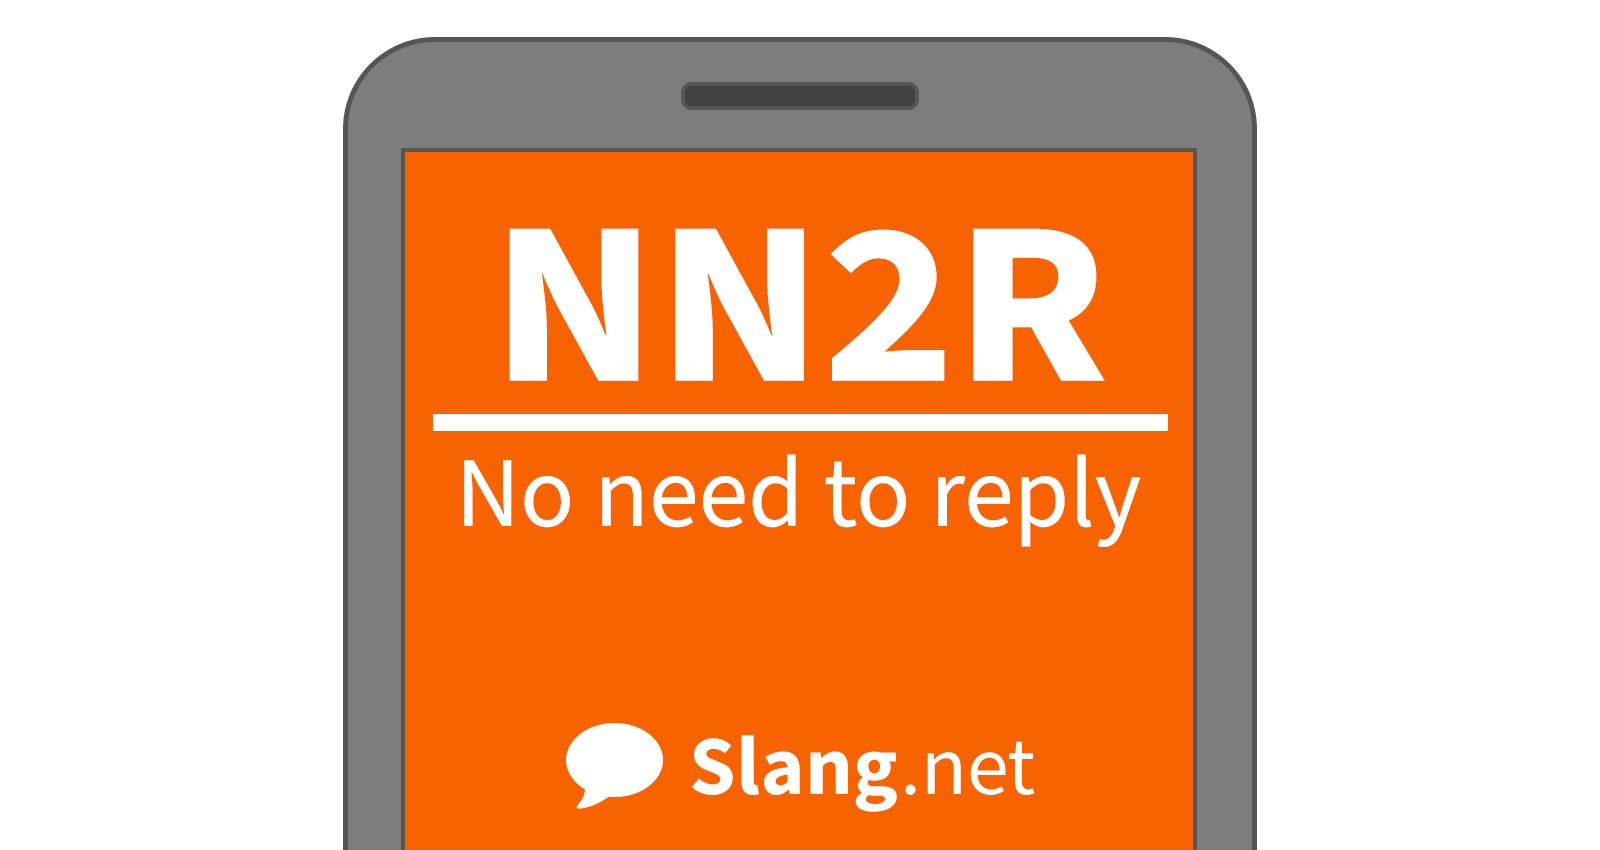 NN2R stands for &quot;no need to reply&quot;